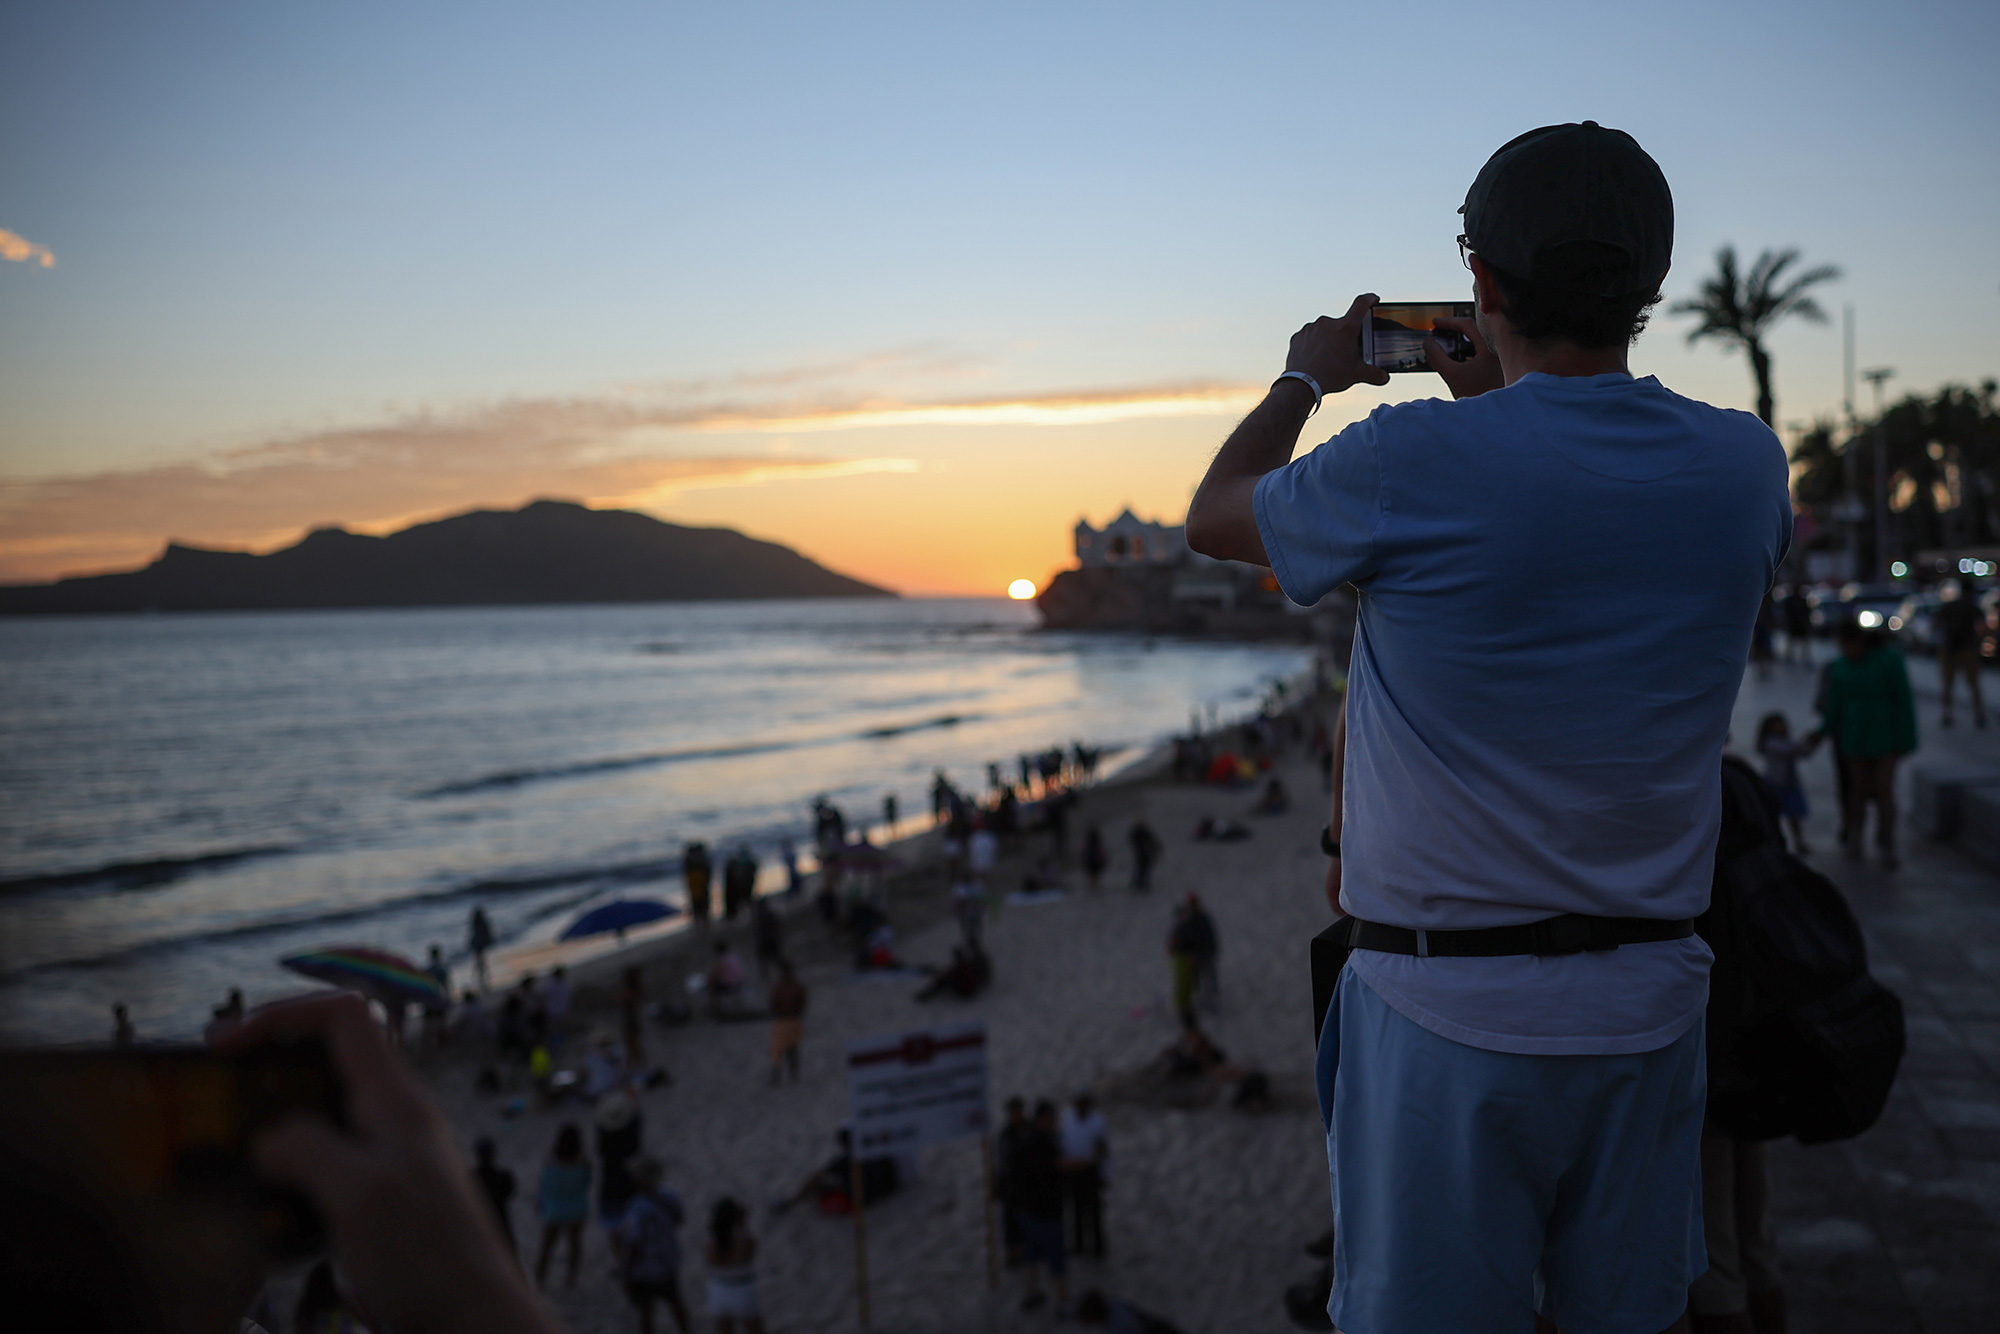 A man takes photos of the sunset ahead of Monday's eclipse in Mazatlán, Mexico, on April 07.